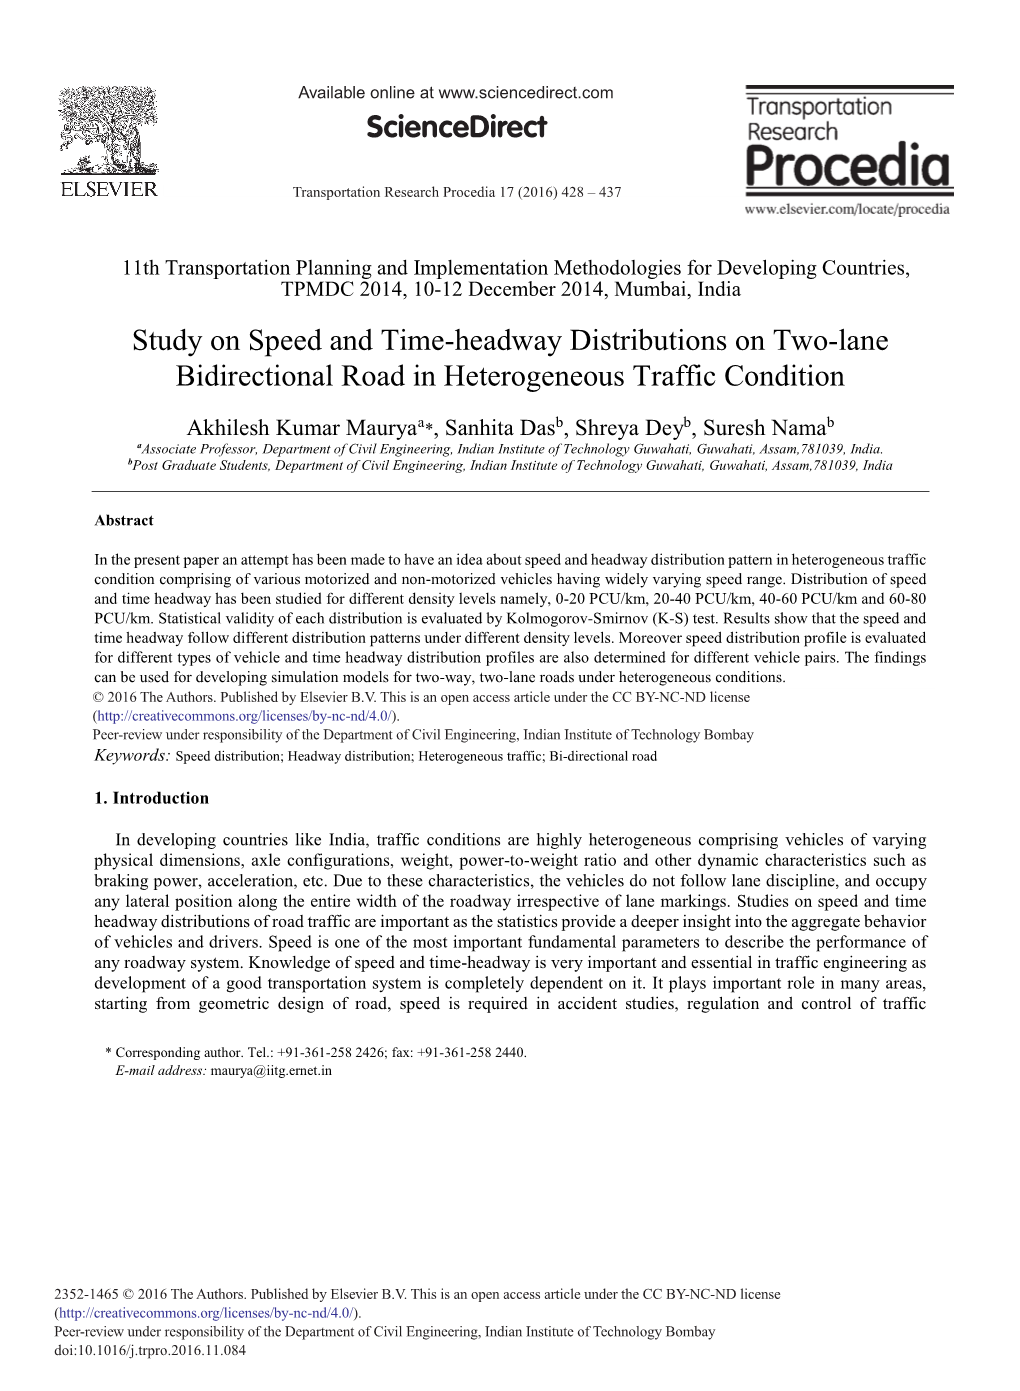 Study on Speed and Time-Headway Distributions on Two-Lane Bidirectional Road in Heterogeneous Traffic Condition